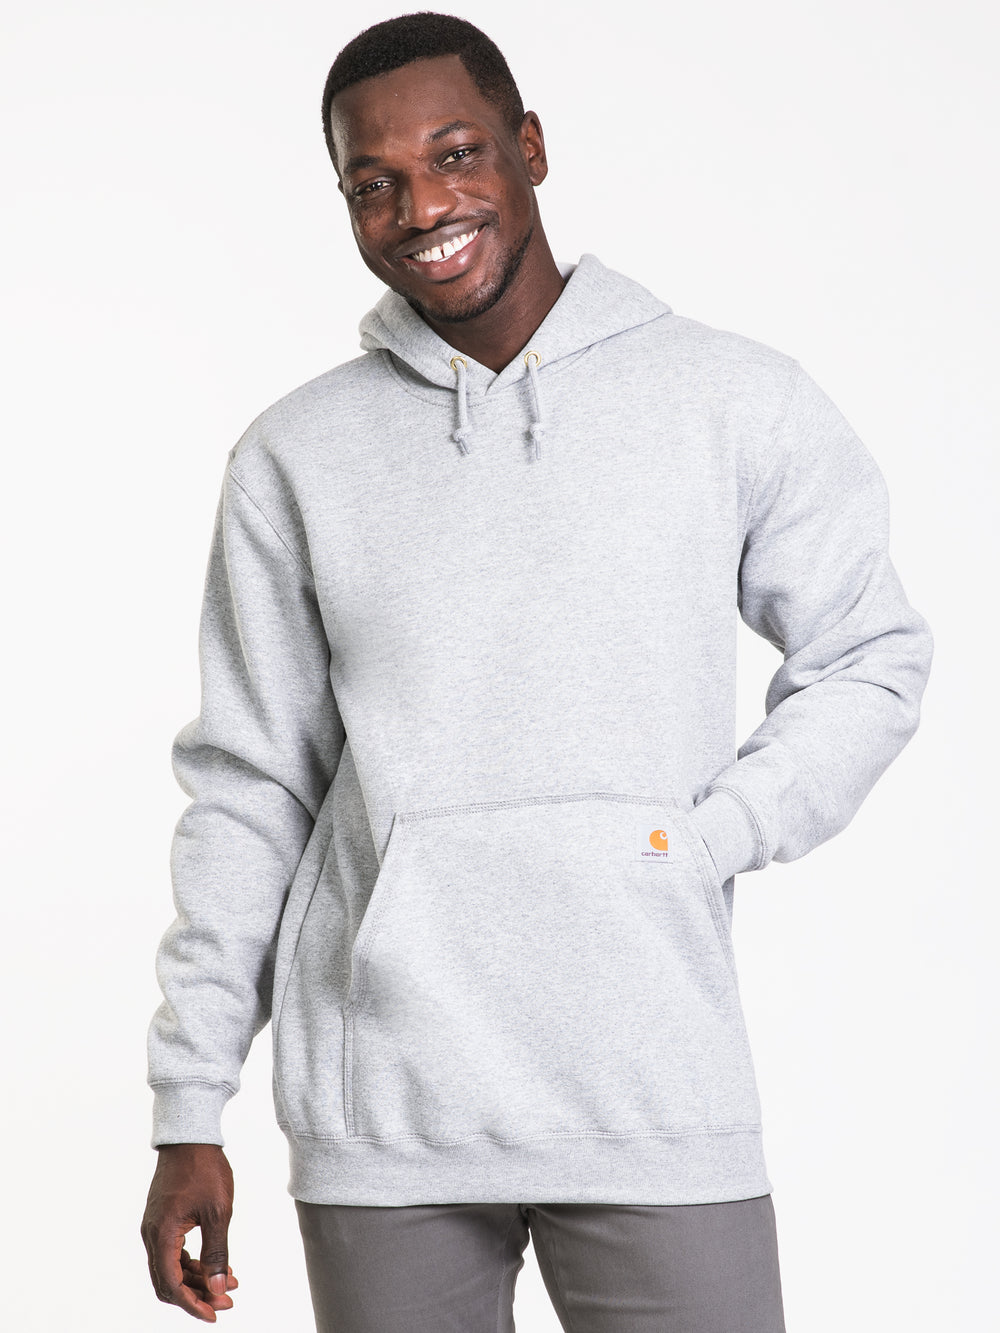 CARHARTT MIDWEIGHT HOODIE  - CLEARANCE